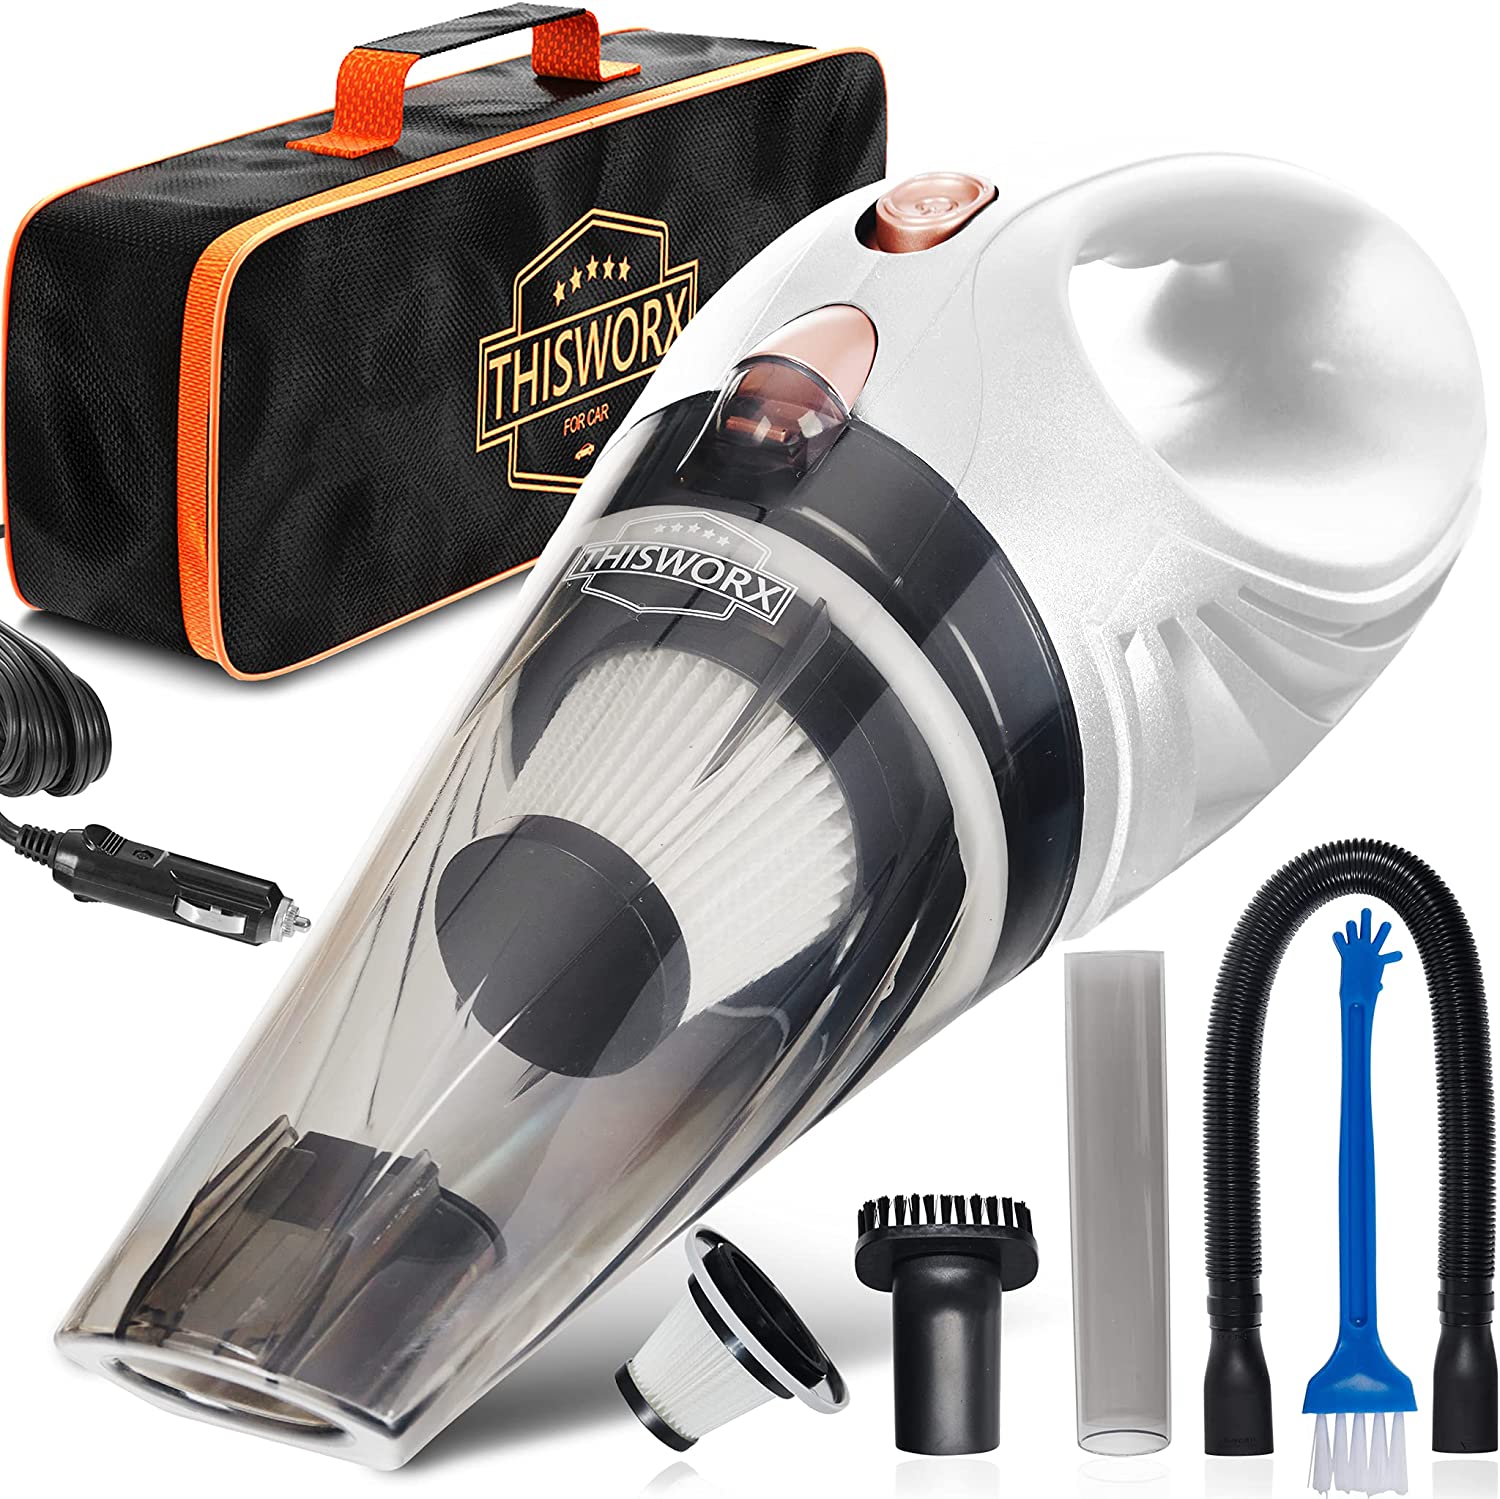 ThisWorx 12V Car Vacuum Cleaner - w/Attachments, 16 Ft Cord & Bag - Detailing Kit Essential, $11.77, Amazon $11.77